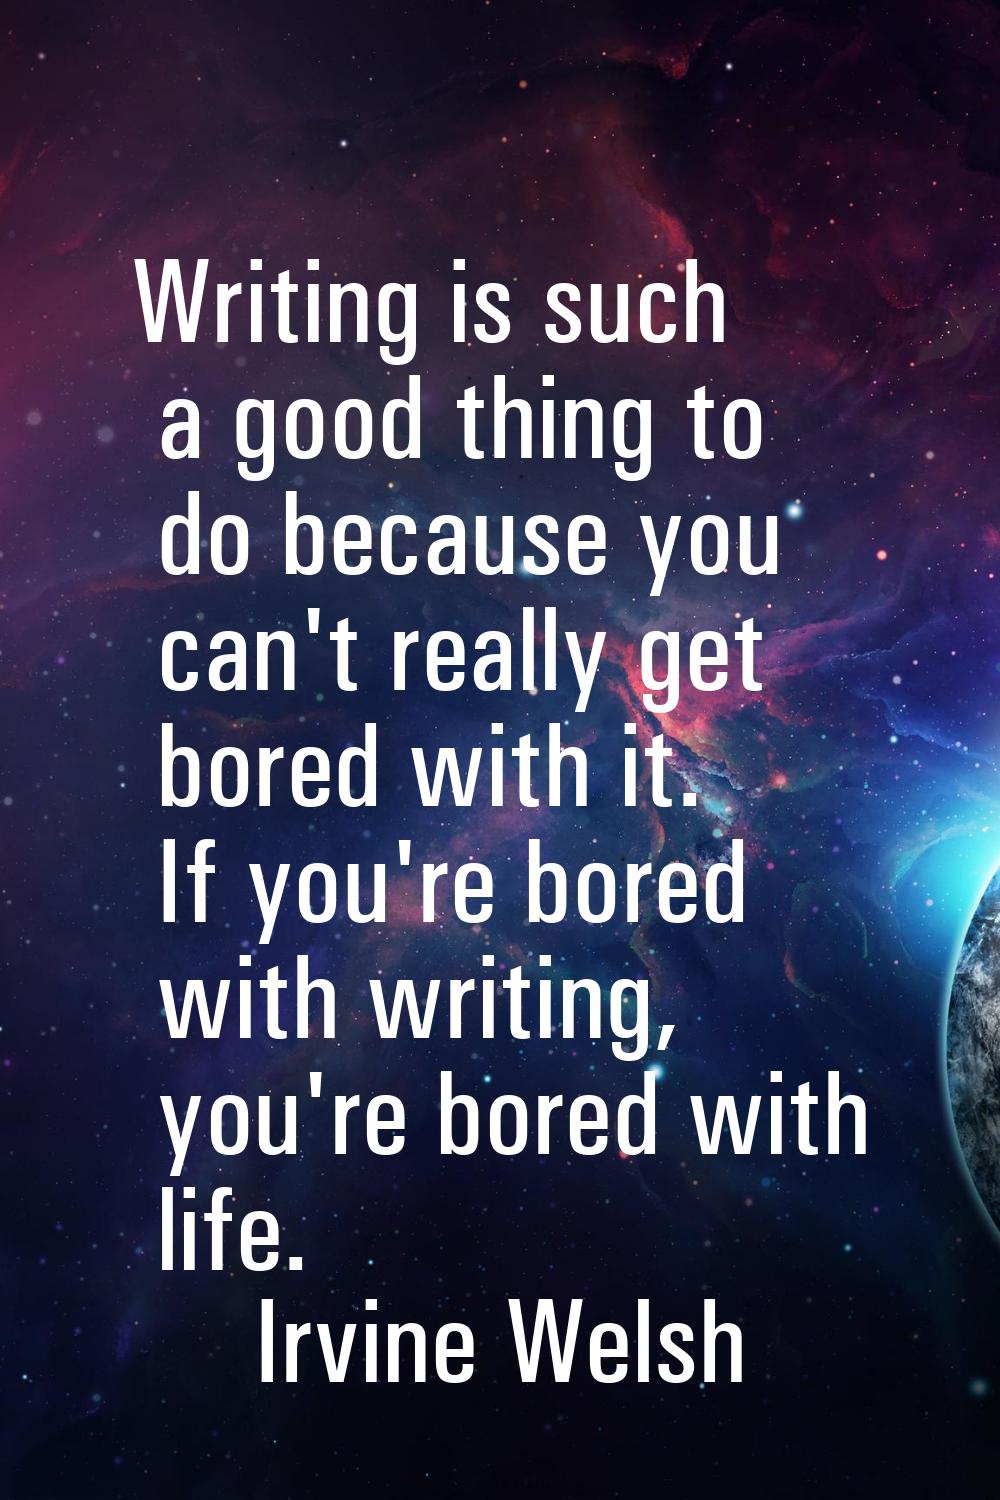 Writing is such a good thing to do because you can't really get bored with it. If you're bored with